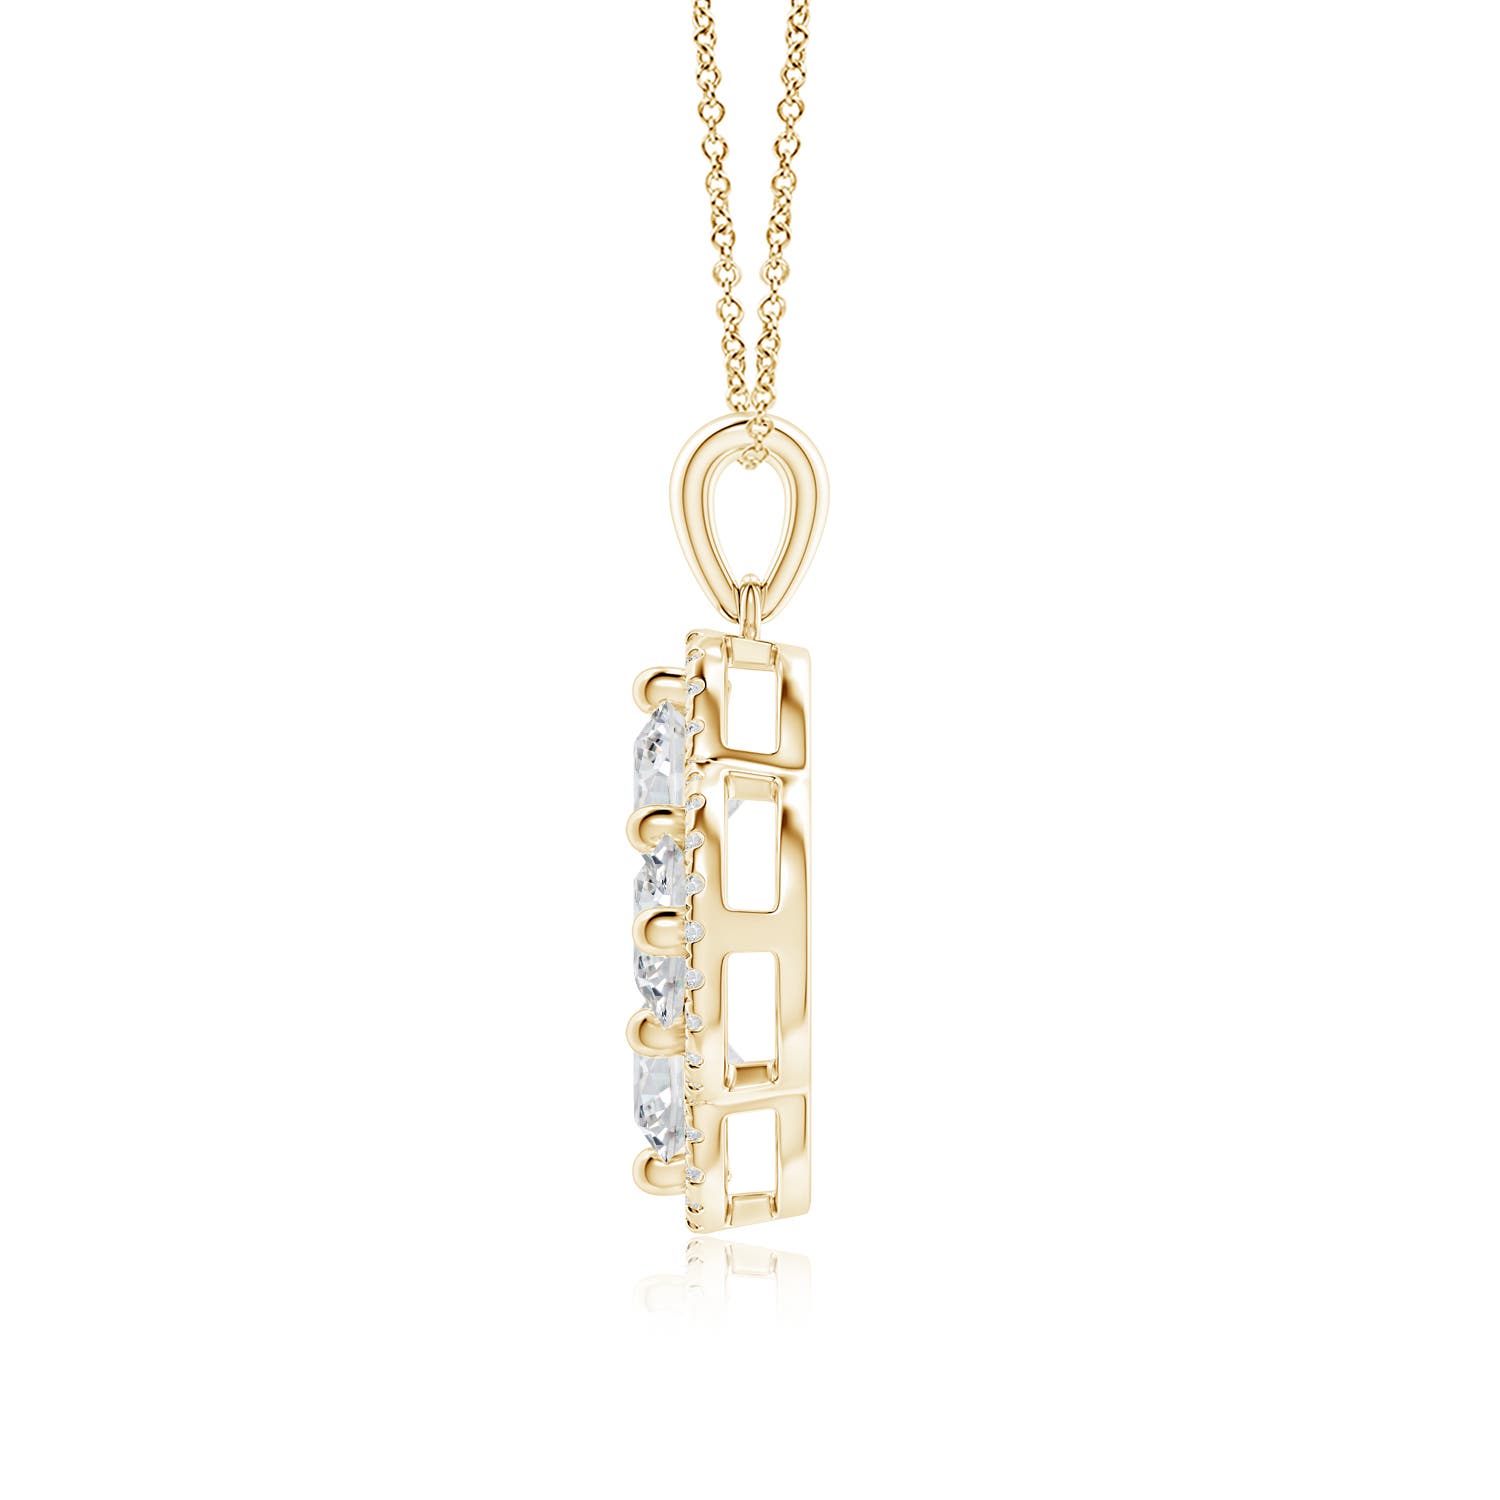 H, SI2 / 2.2 CT / 14 KT Yellow Gold